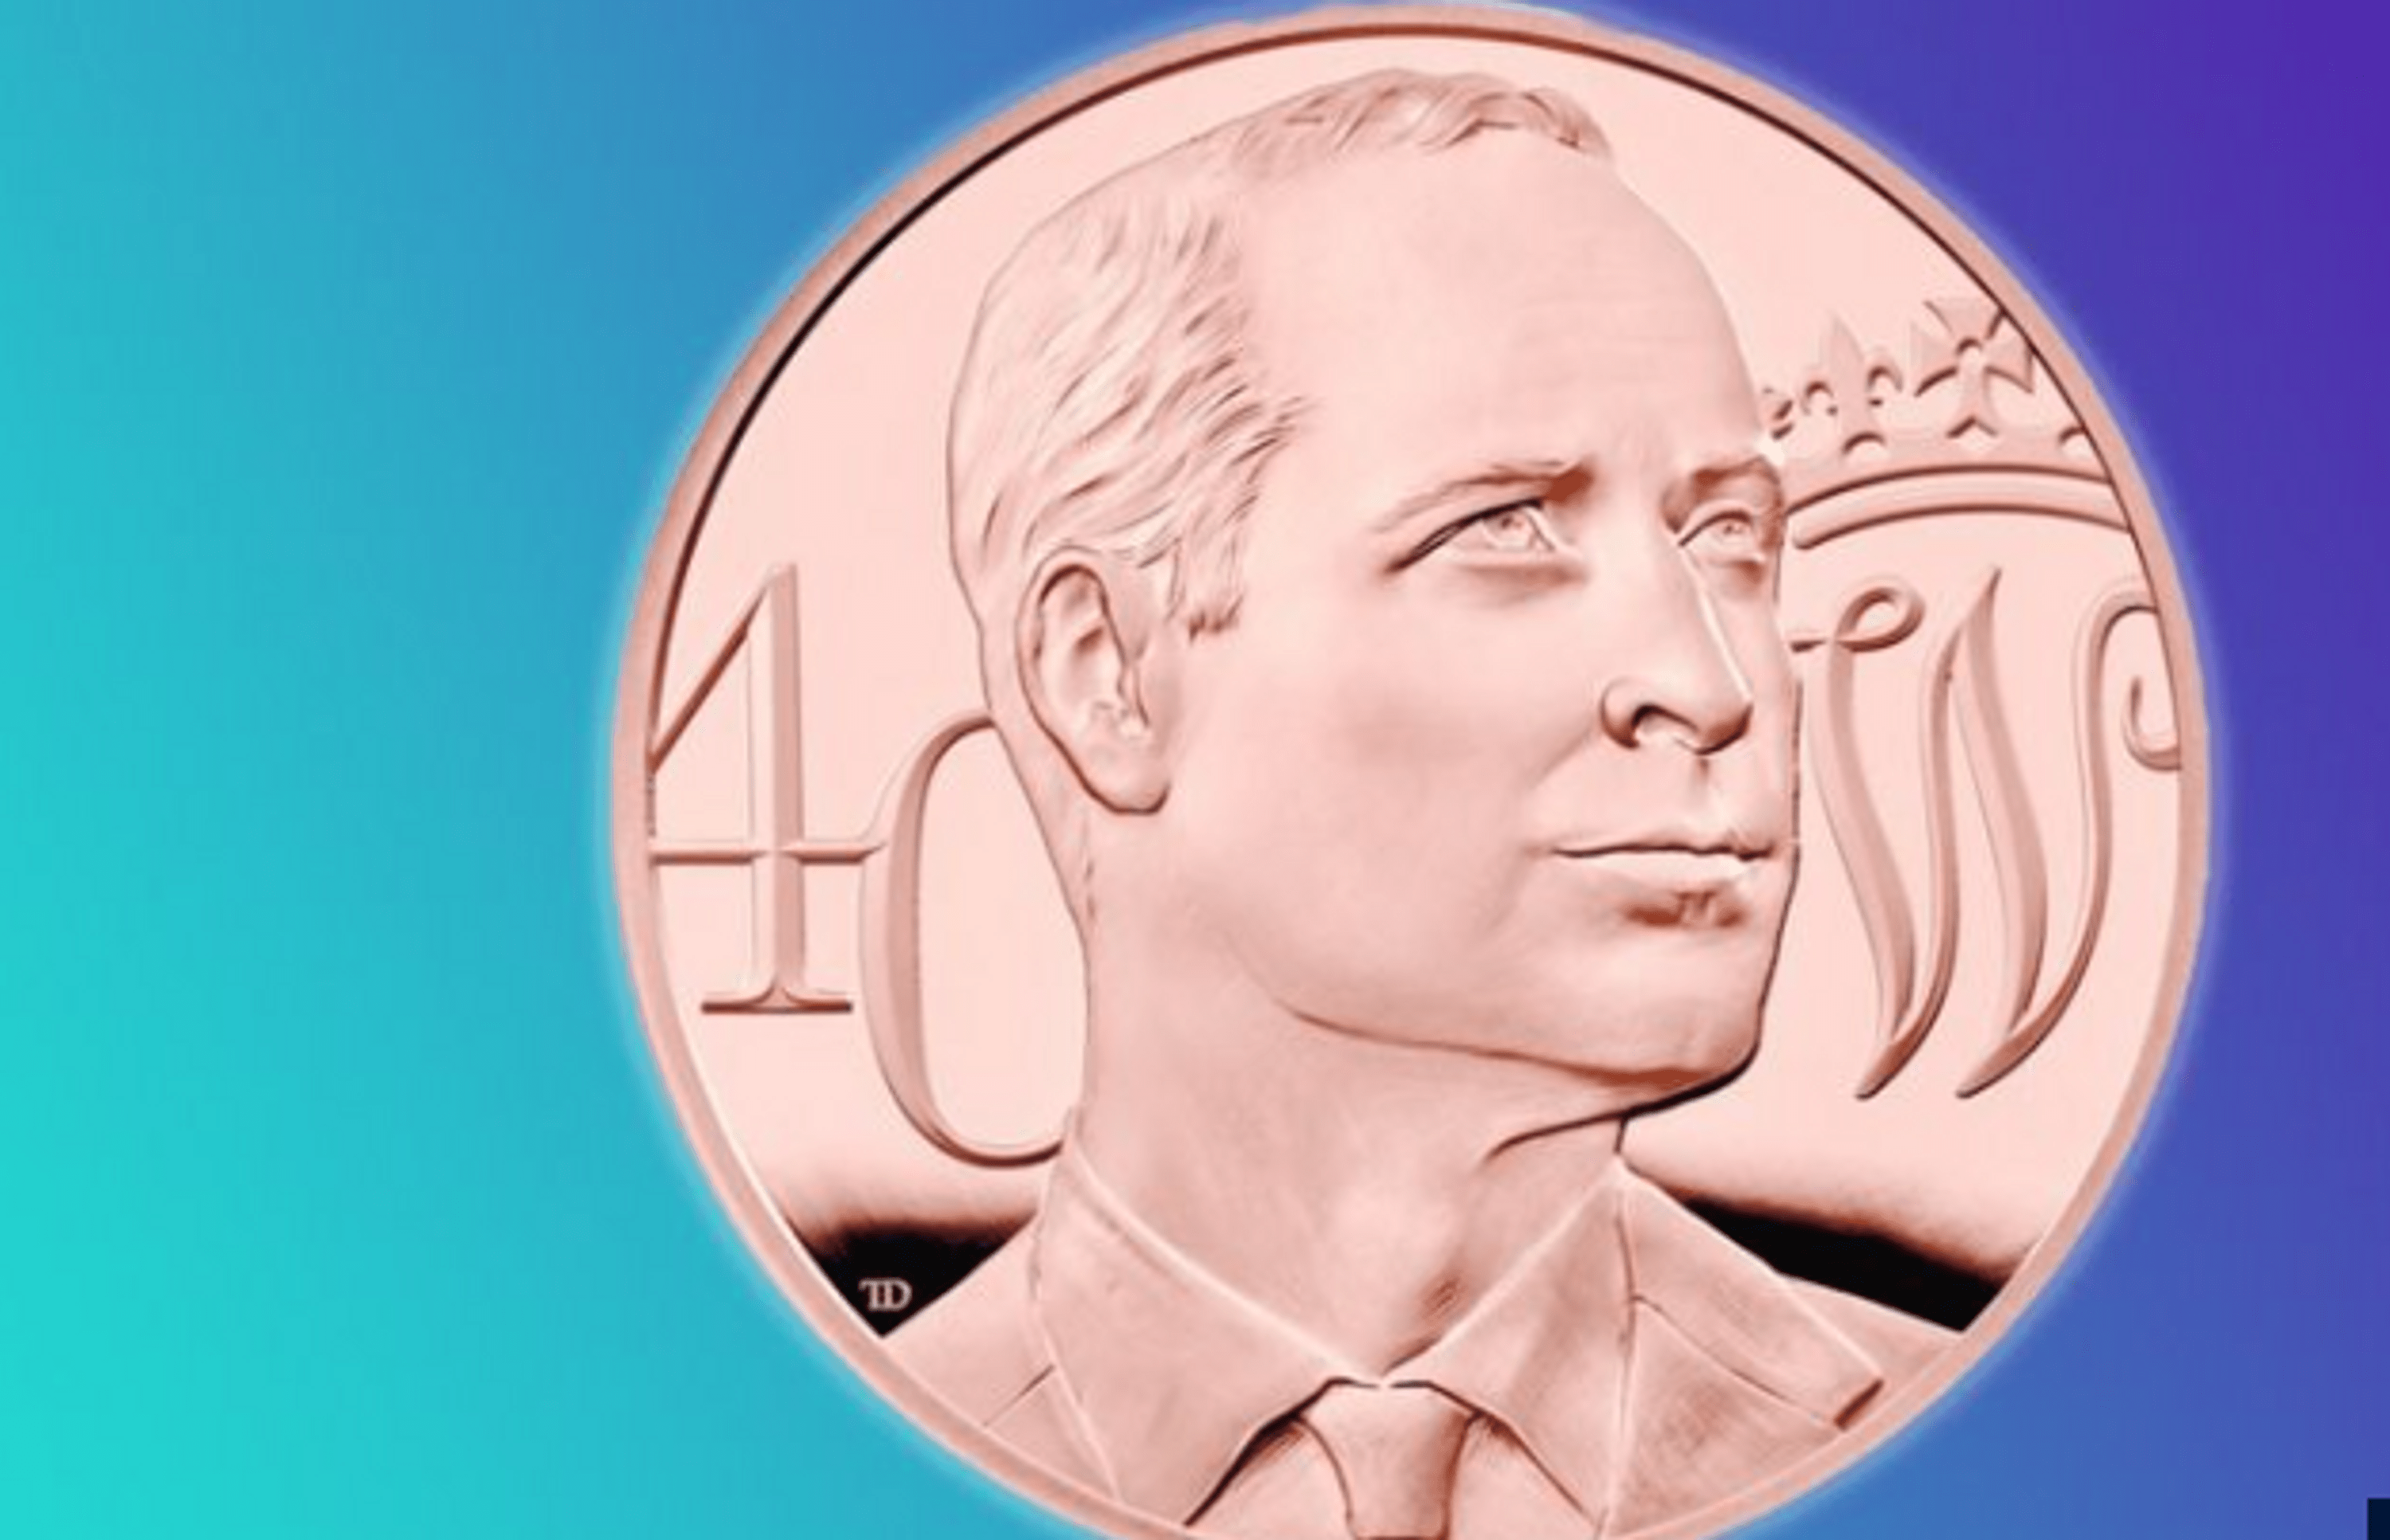 ”commemorative-coin-to-be-issued-to-celebrate-prince-williams-40th-birthday”